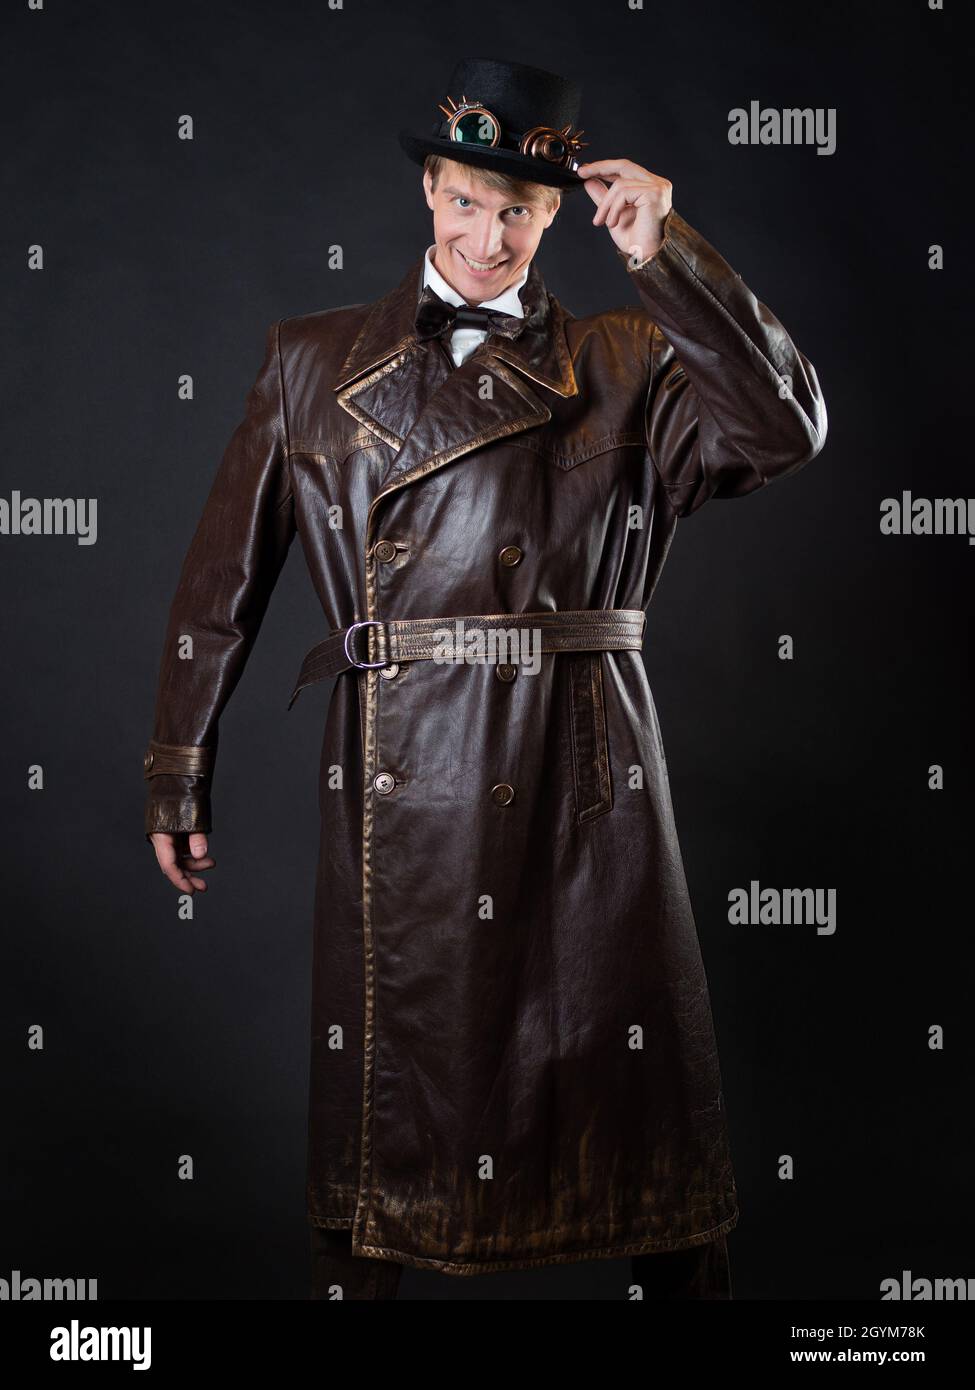 Funny man in a ridiculous leather coat and a top hat, vintage style of  clothing, photo on a black background Stock Photo - Alamy